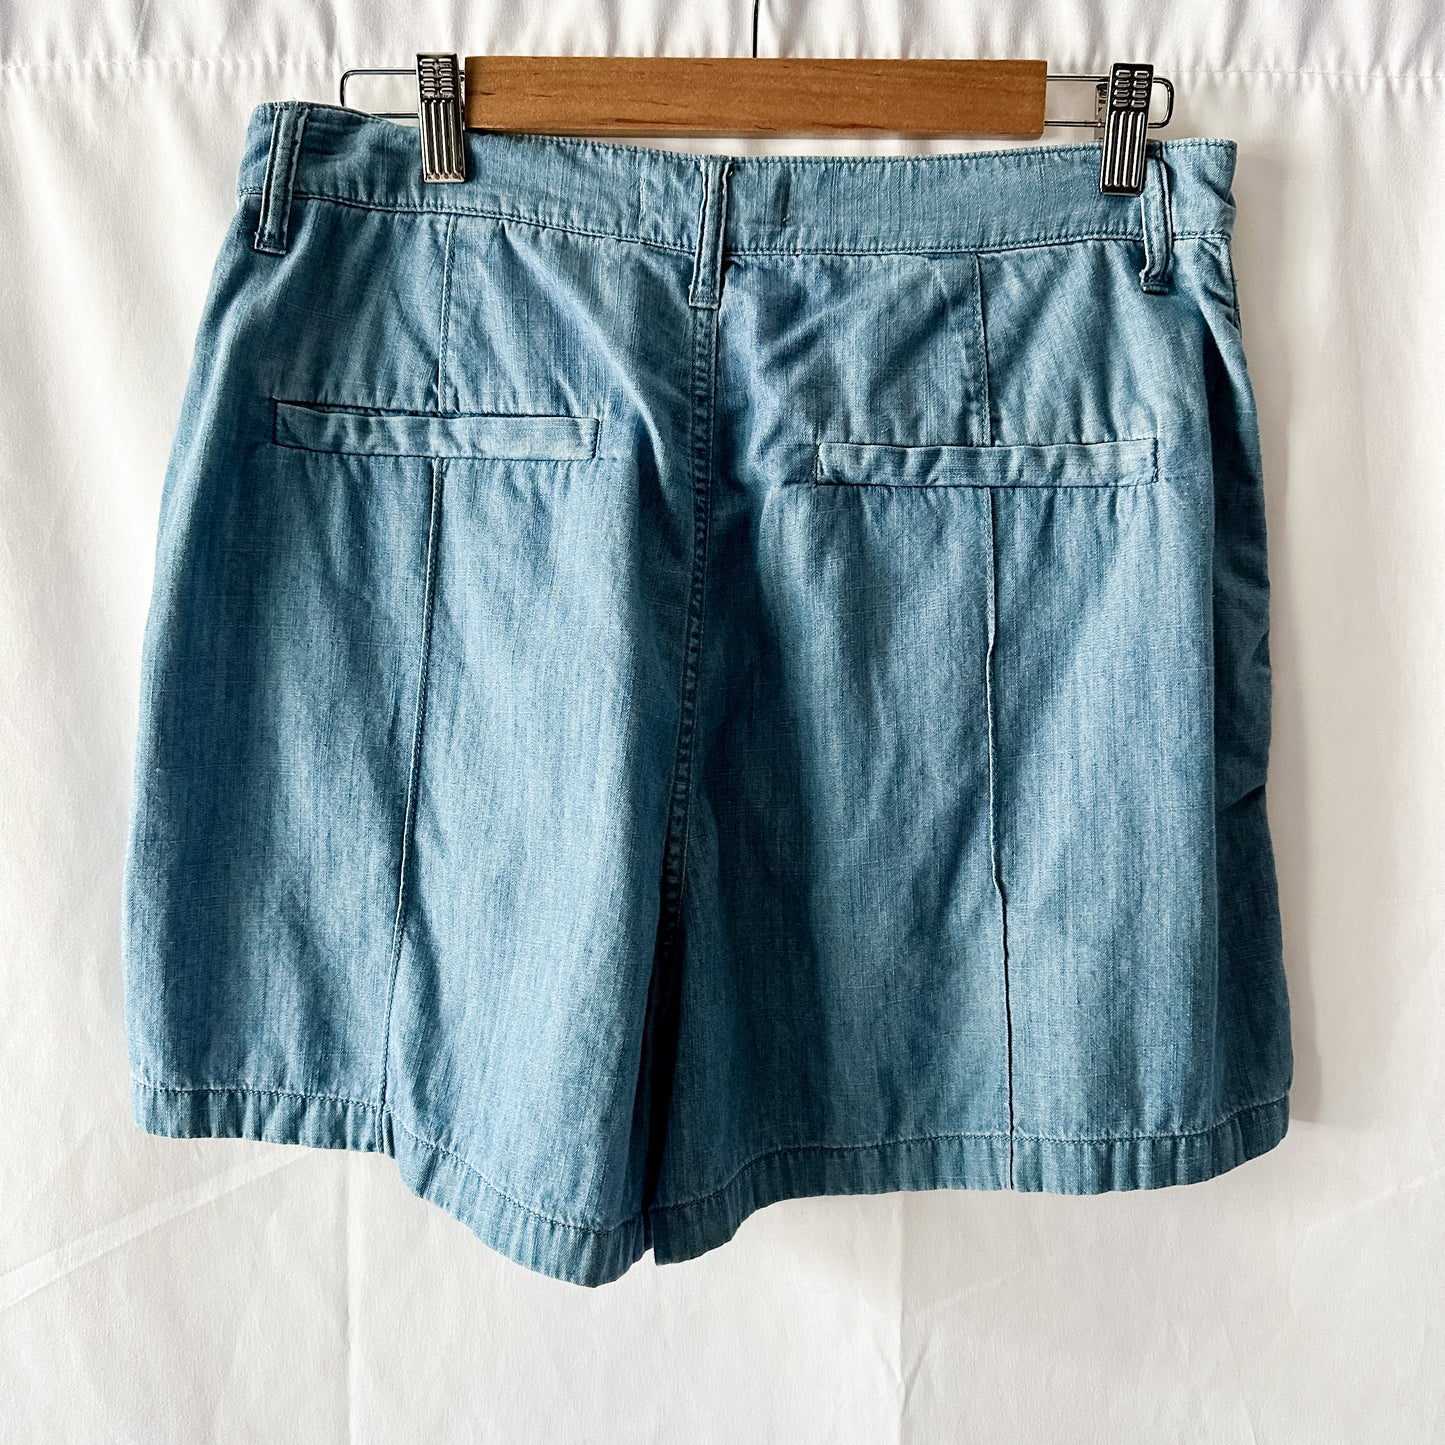 Madewell Chambray Denim Trouser Shorts (fits size 6)